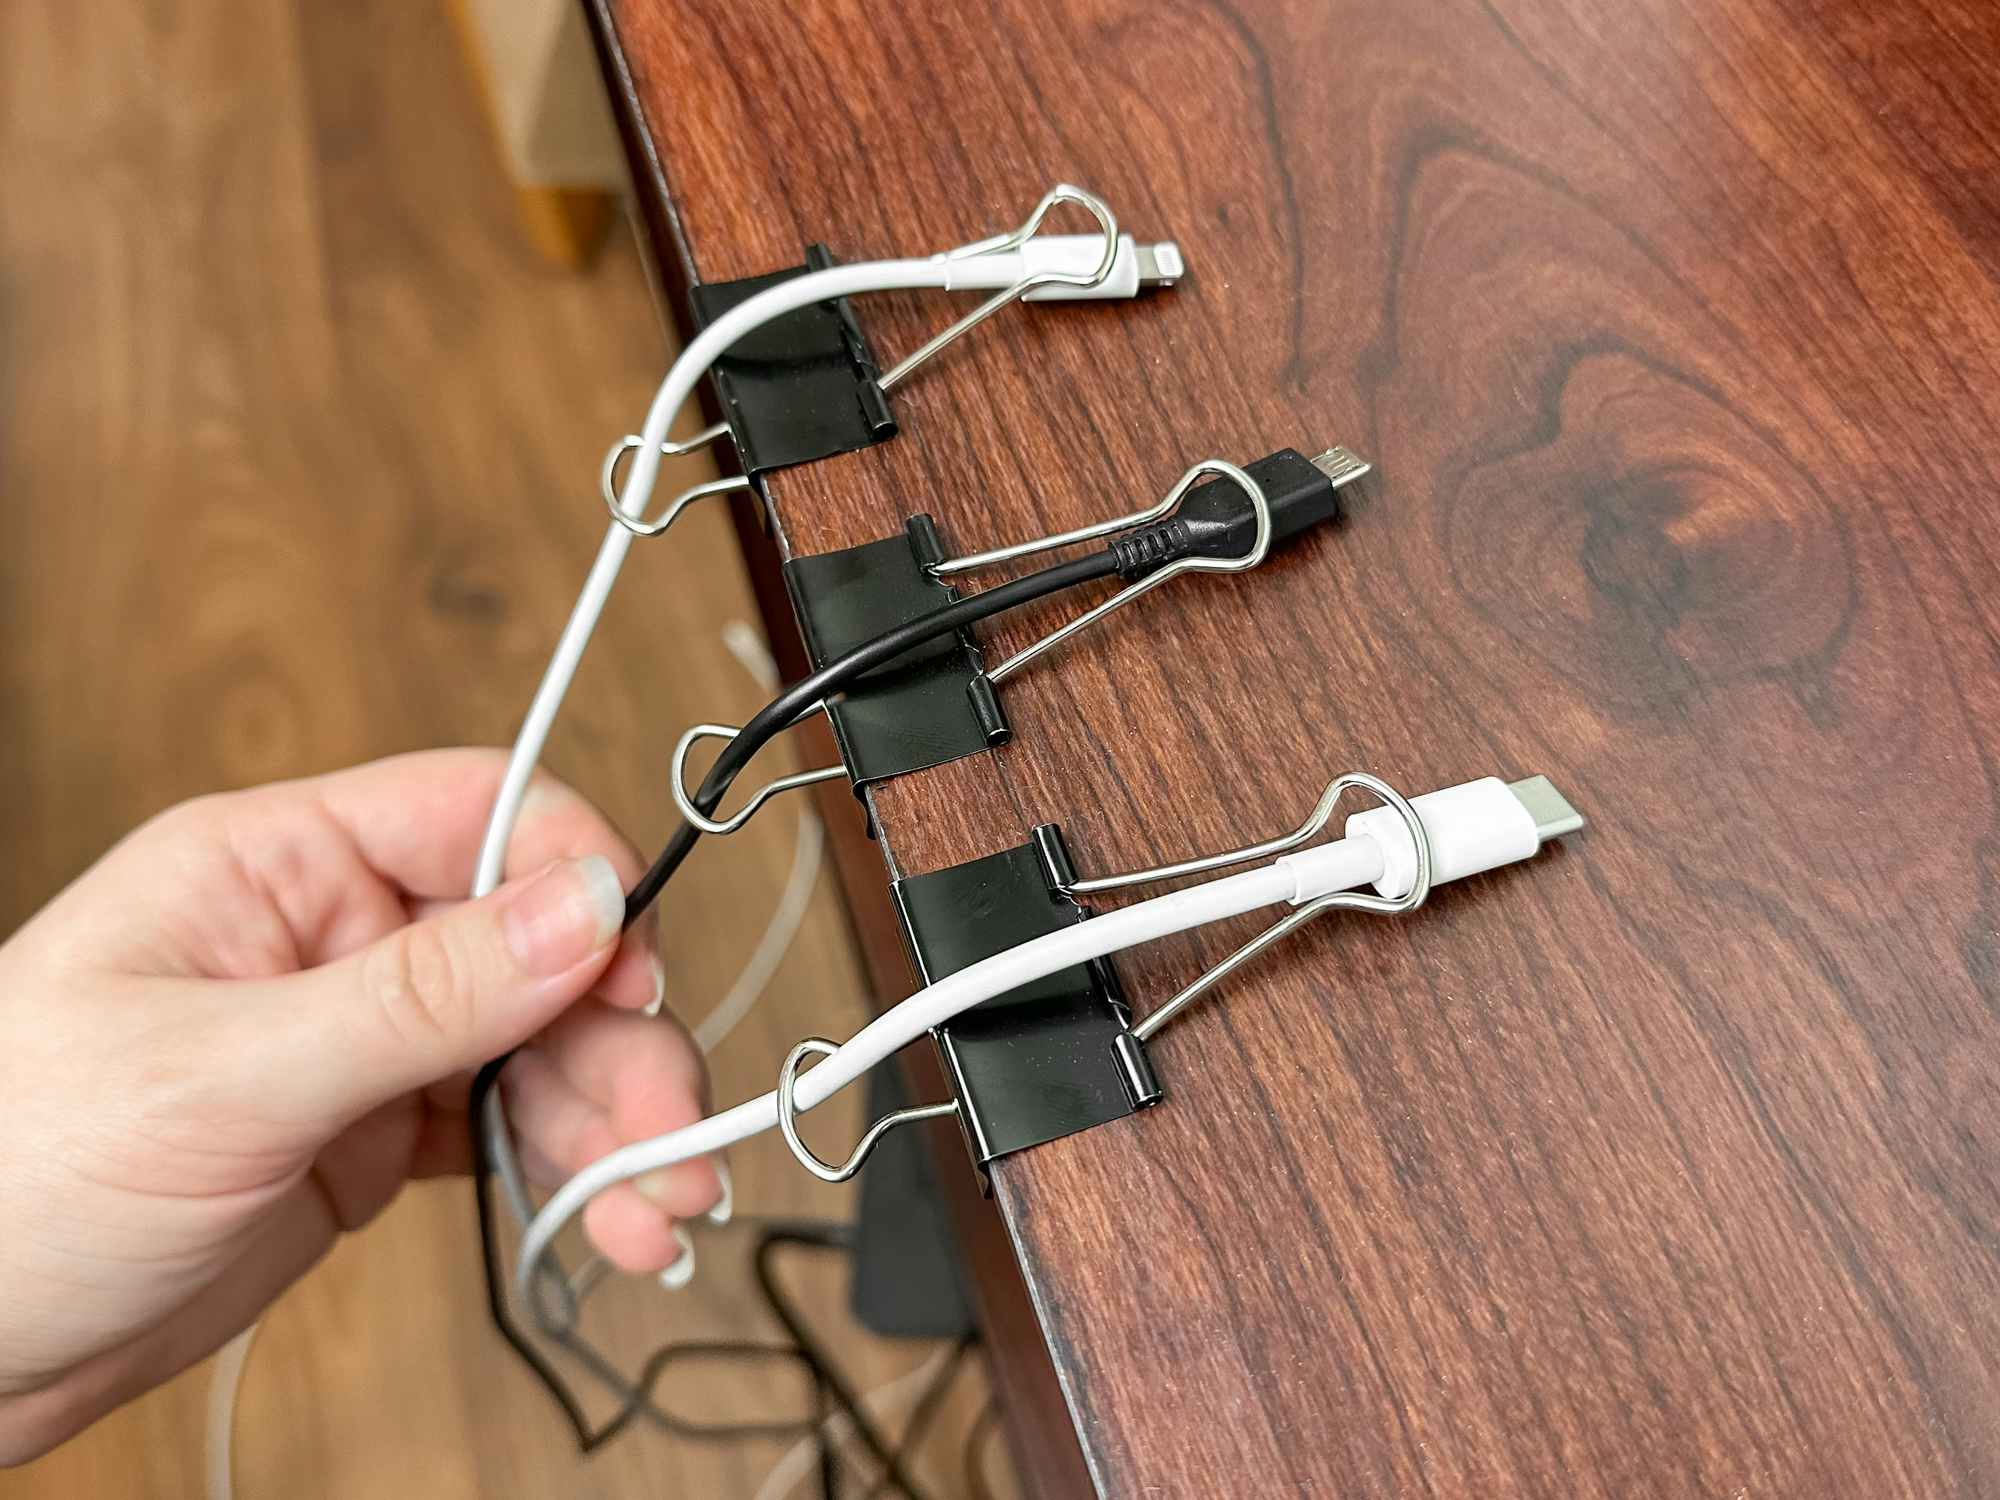 Someone organizing charging cords with binder clips